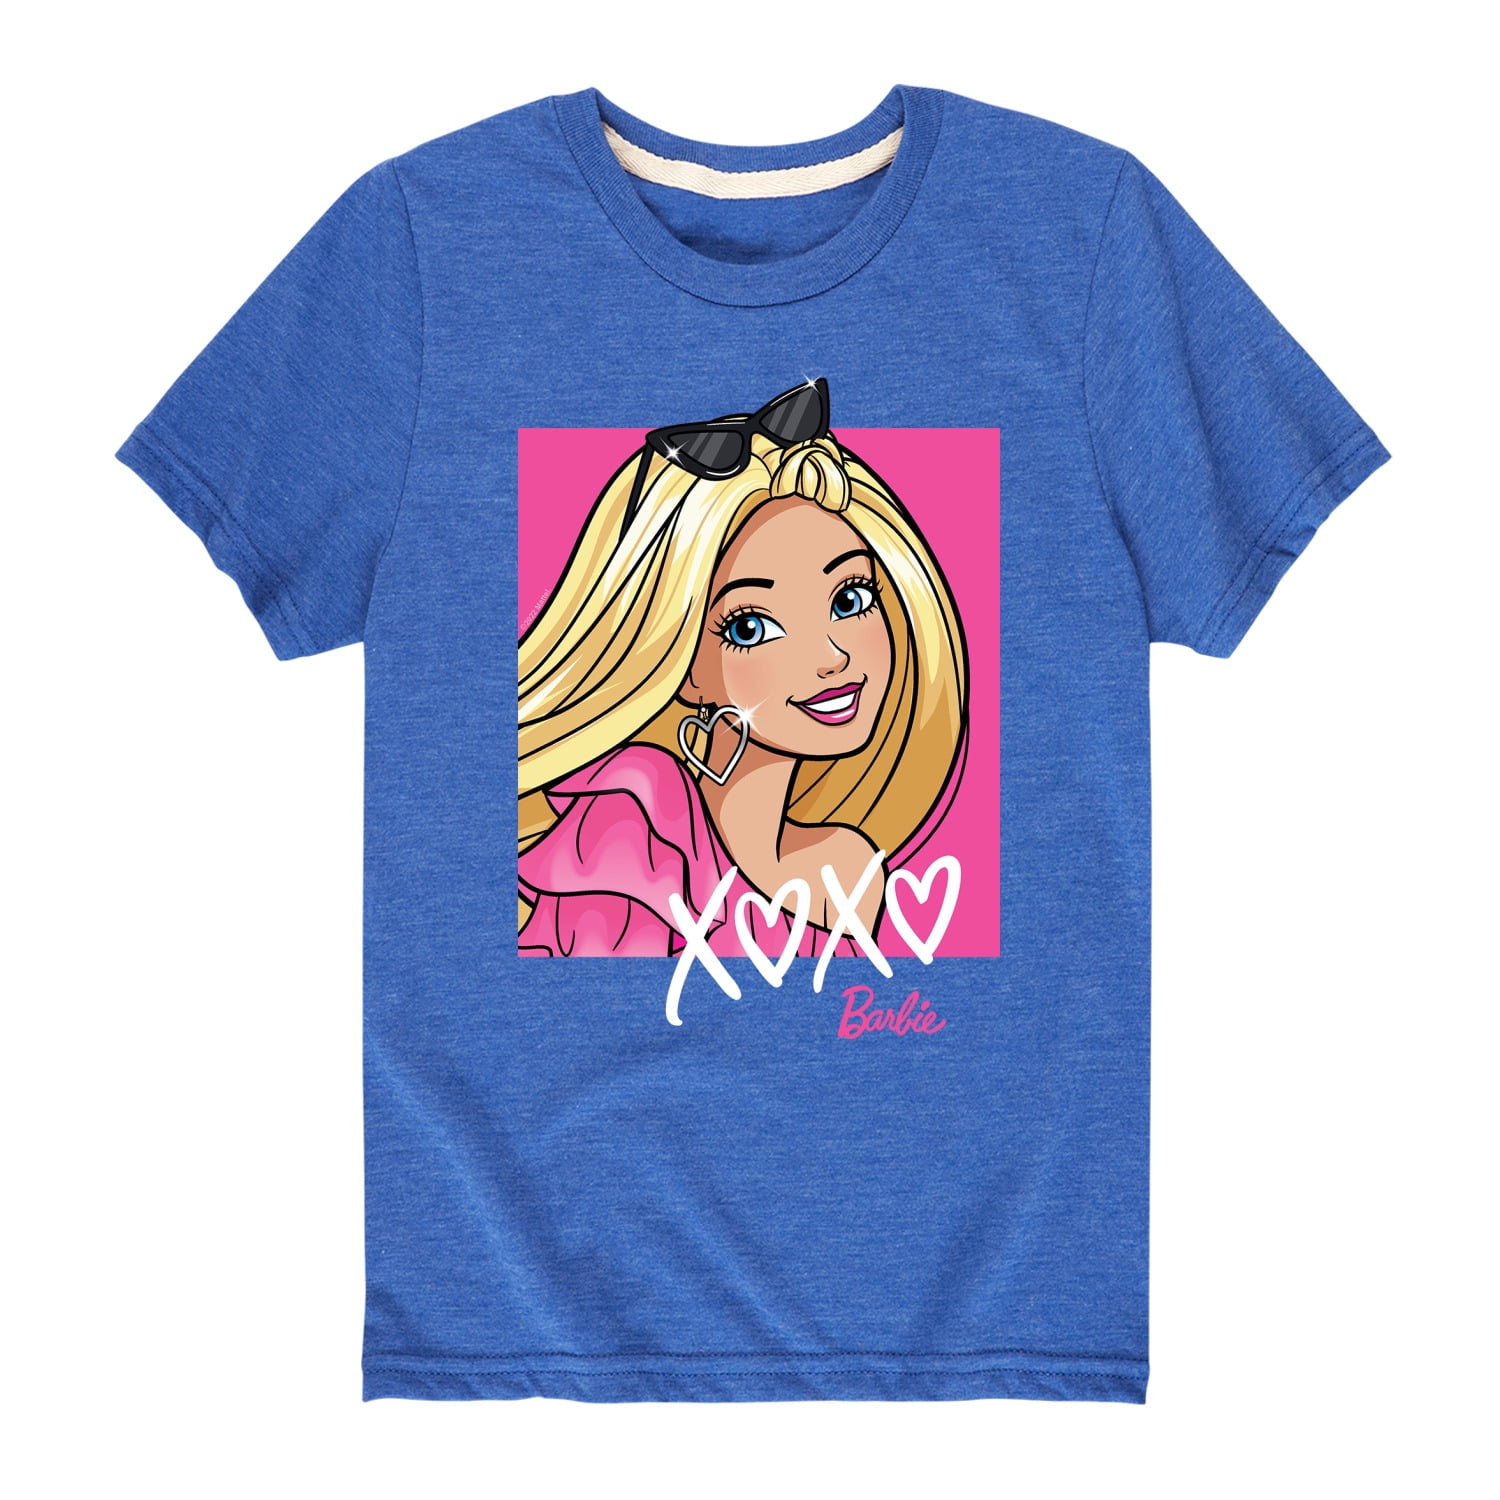 Barbie - Xoxo Barbie - Toddler And Youth Short Sleeve Graphic T-Shirt ...